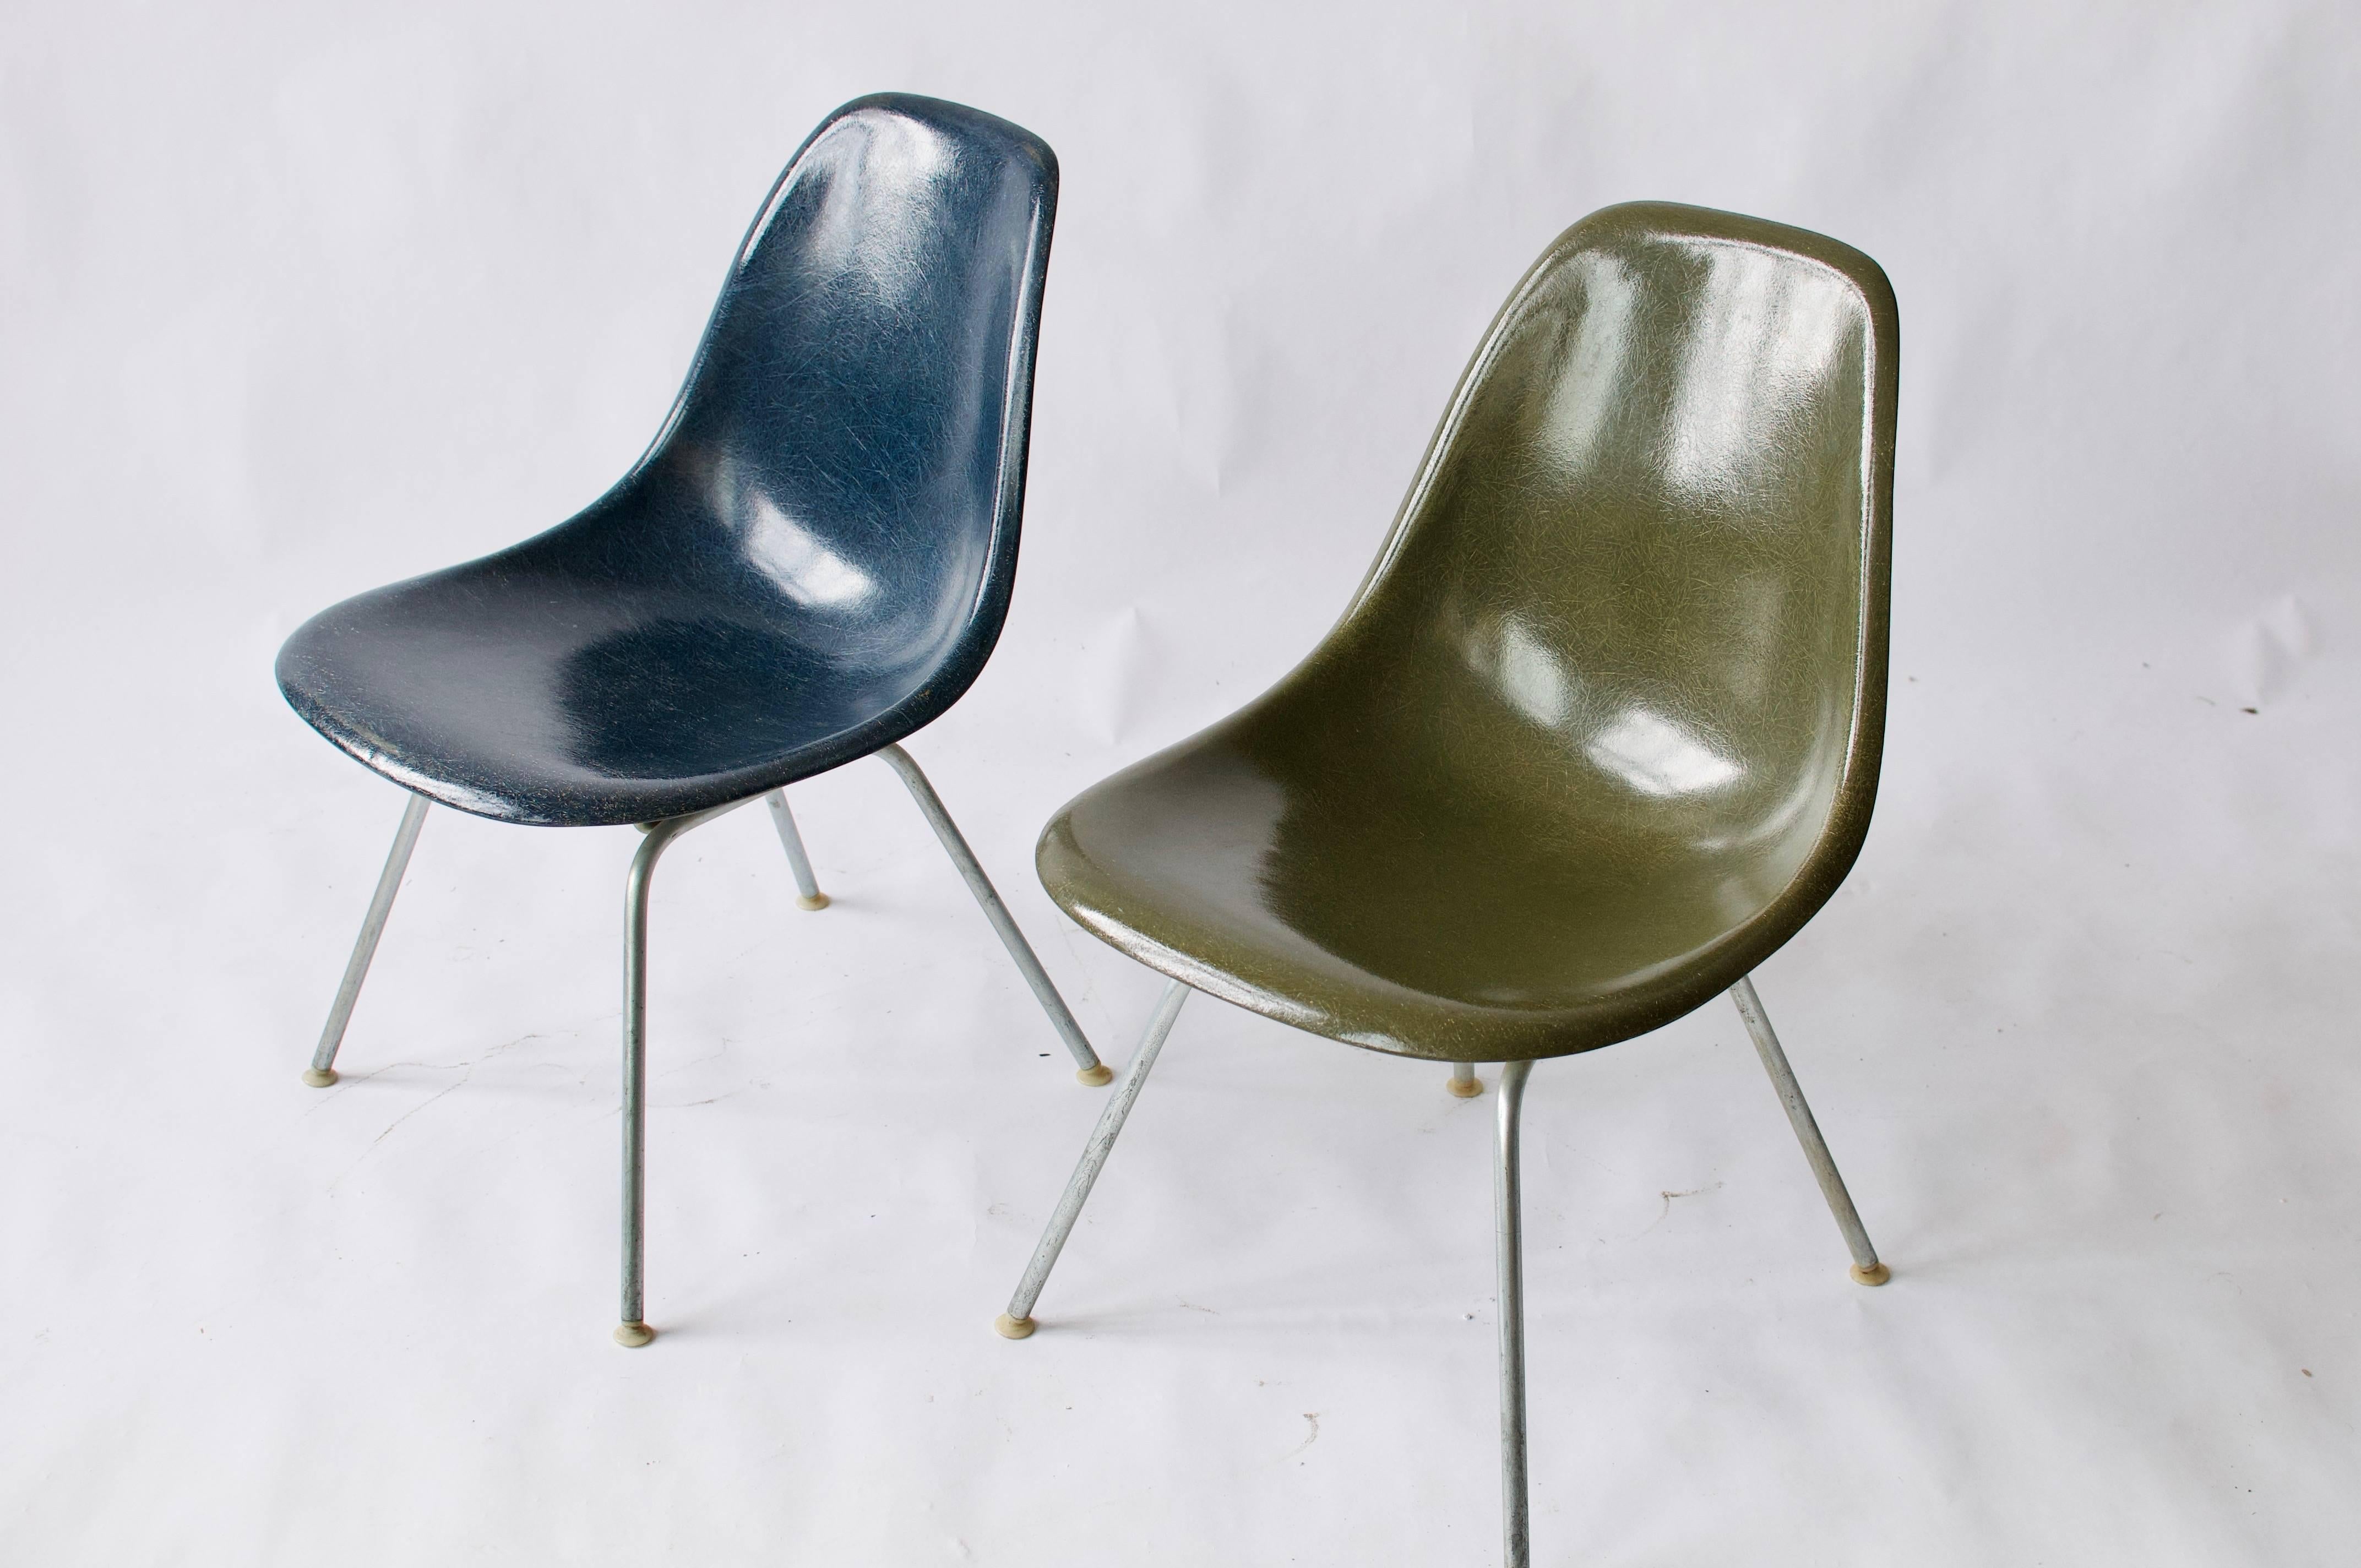 American Pair of Charles Eames Shell Chairs with Lounge Base For Sale